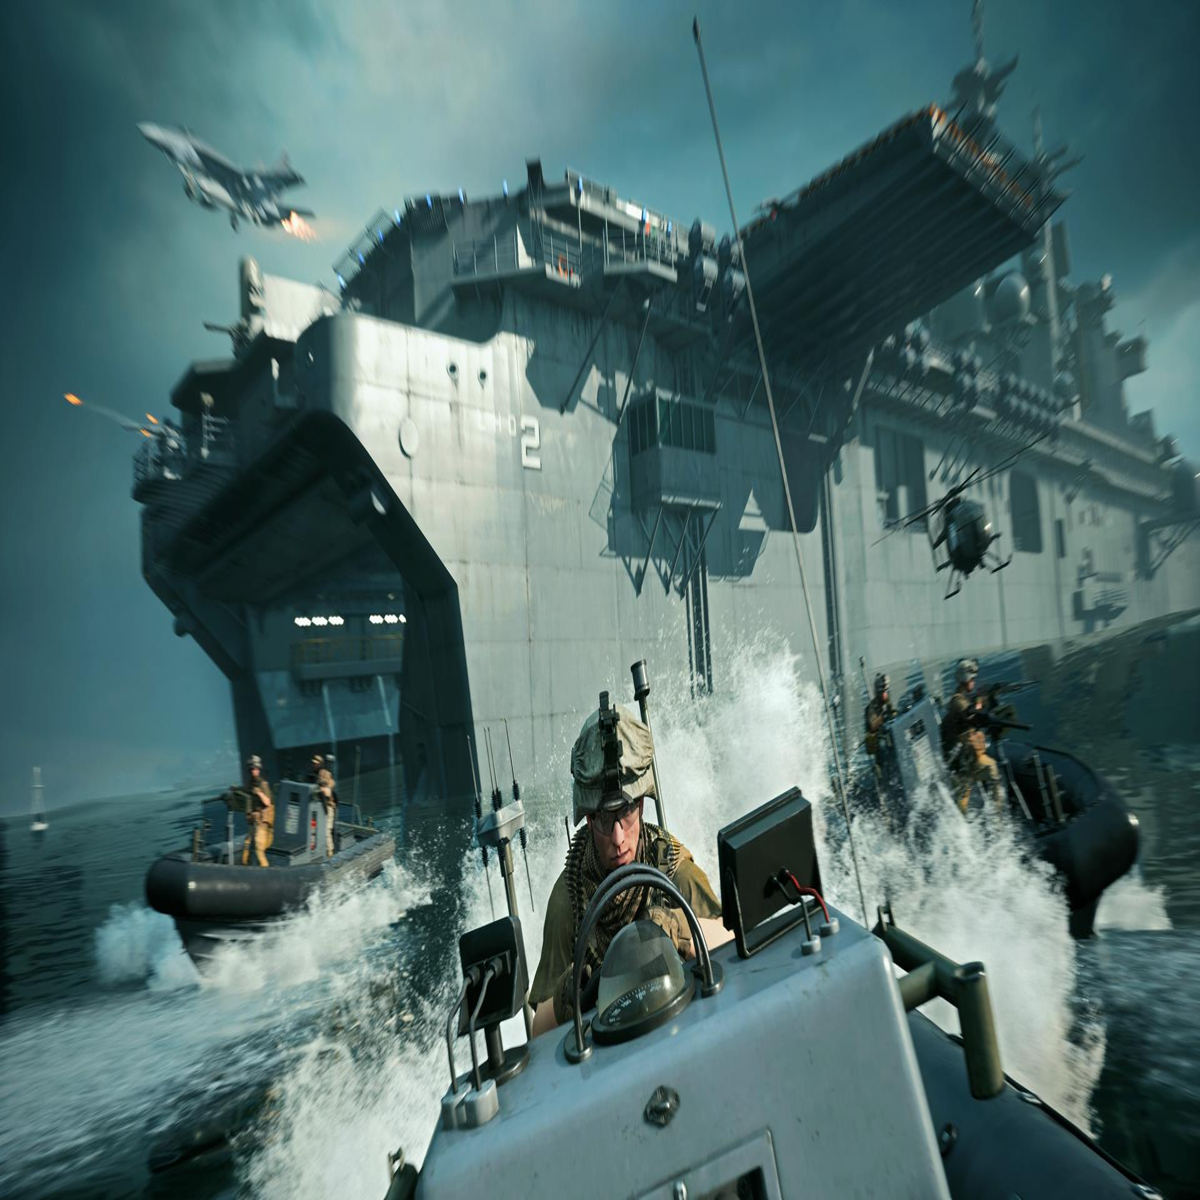 Players flood Battlefield 4 servers in anticipation of Battlefield 2042 -  WholesGame